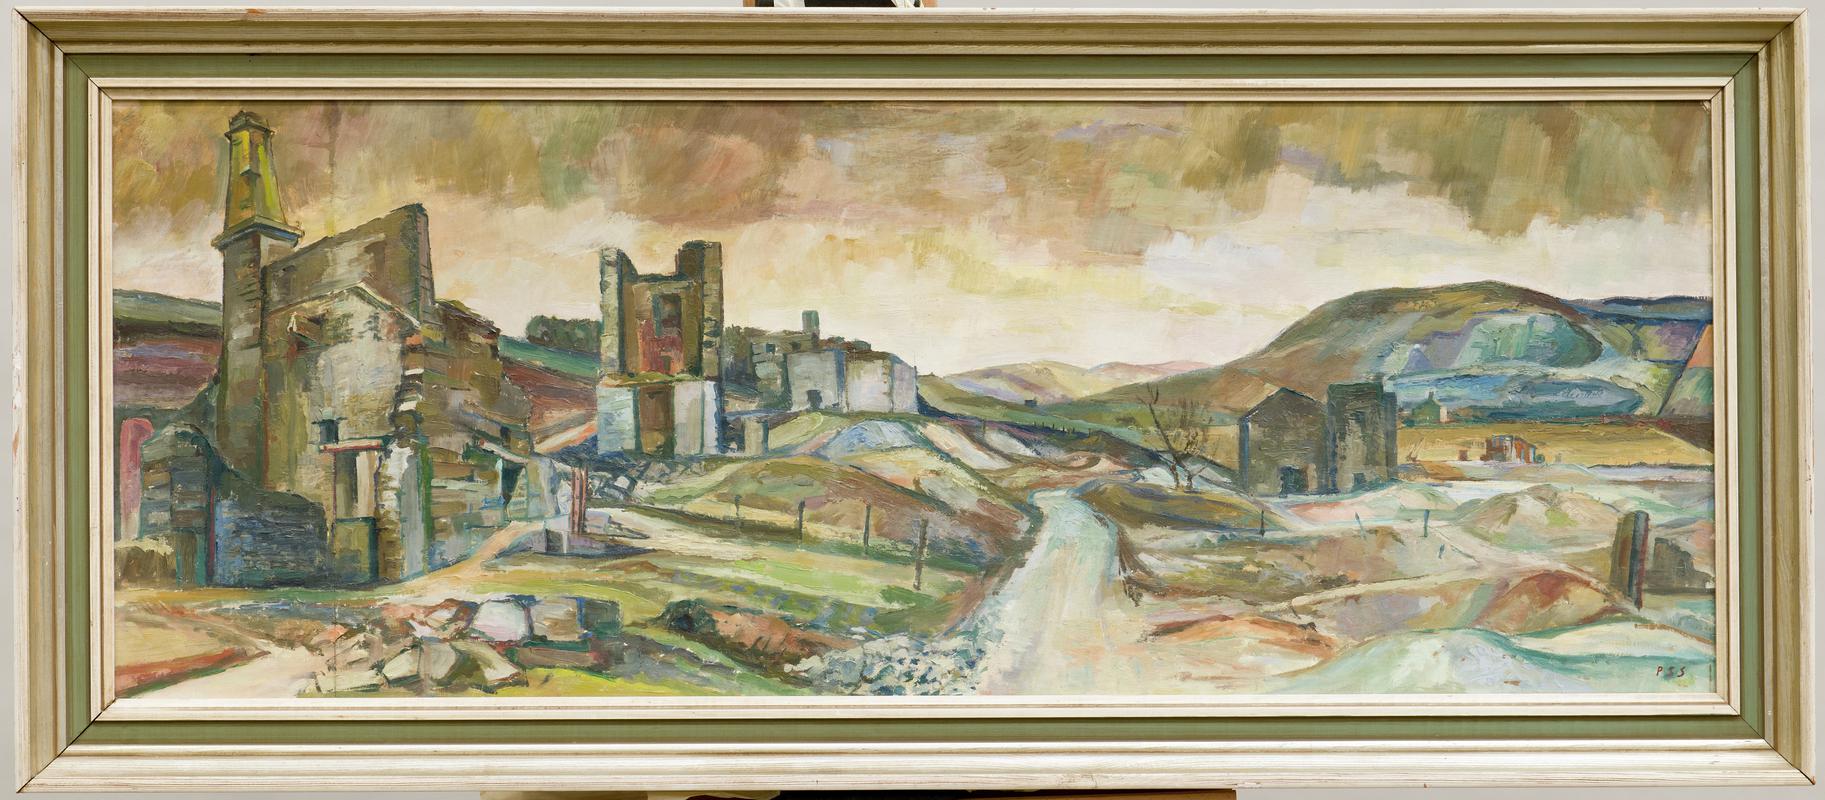 Painting &#039;Frongoch Lead Mines Nr Aberystwyth&#039; by P.S. Smith